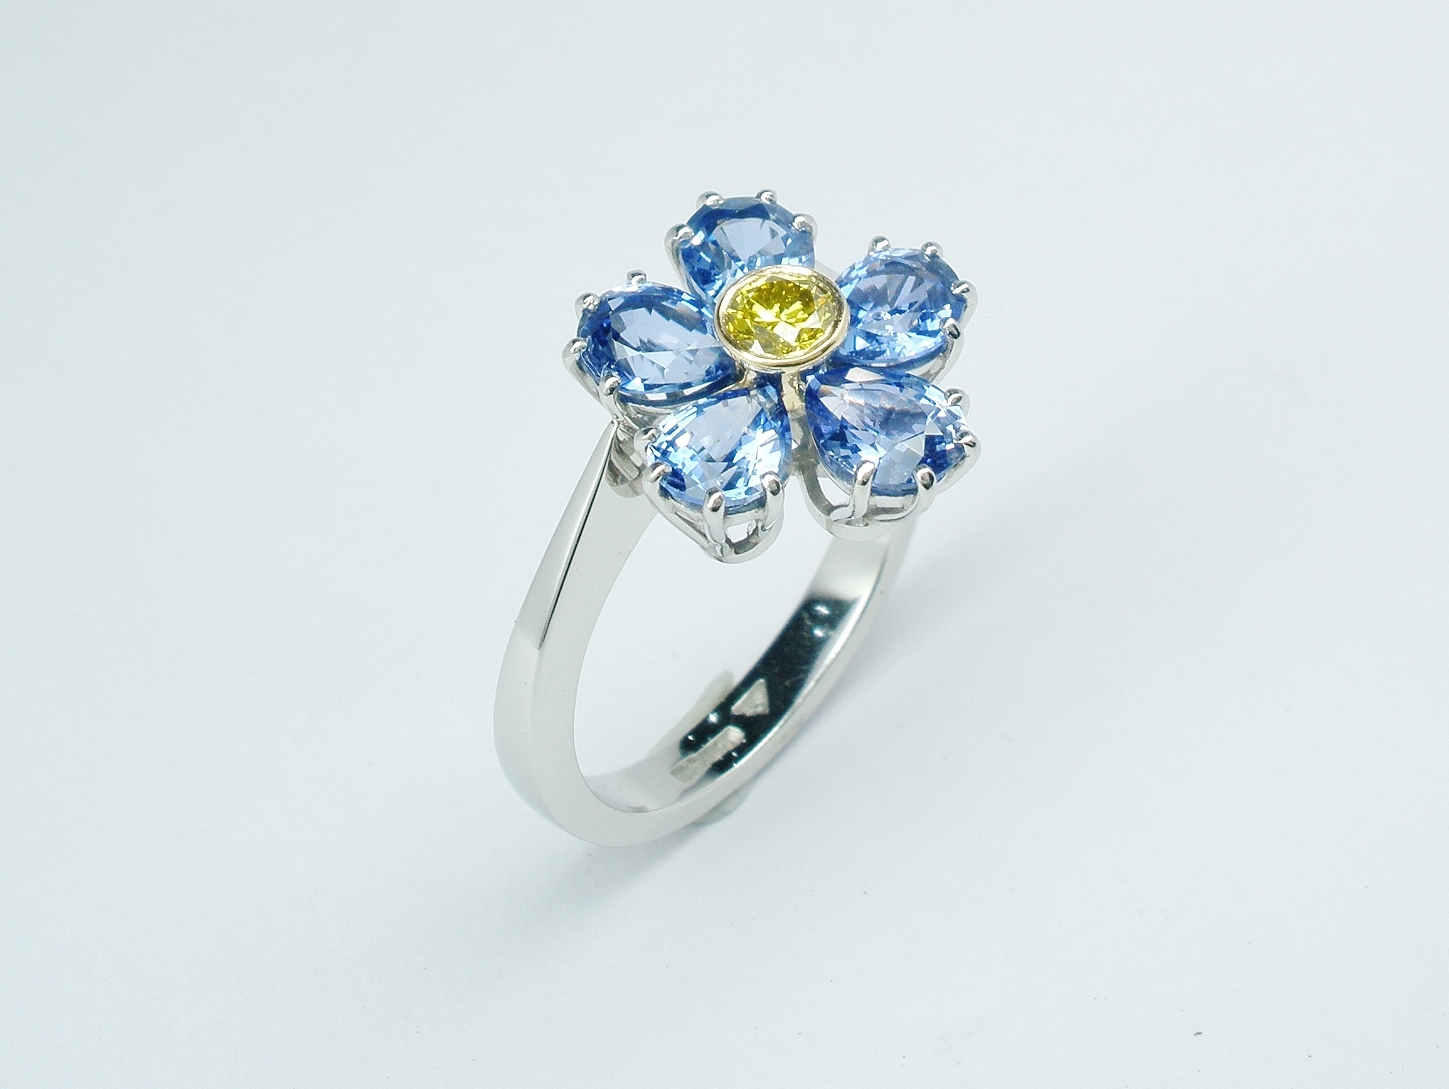 6 pear shaped sapphire and HTHP treated canary yellow diamond ring mounted in platinum & 18ct. yellow gold to mimic a Forget Me Not.